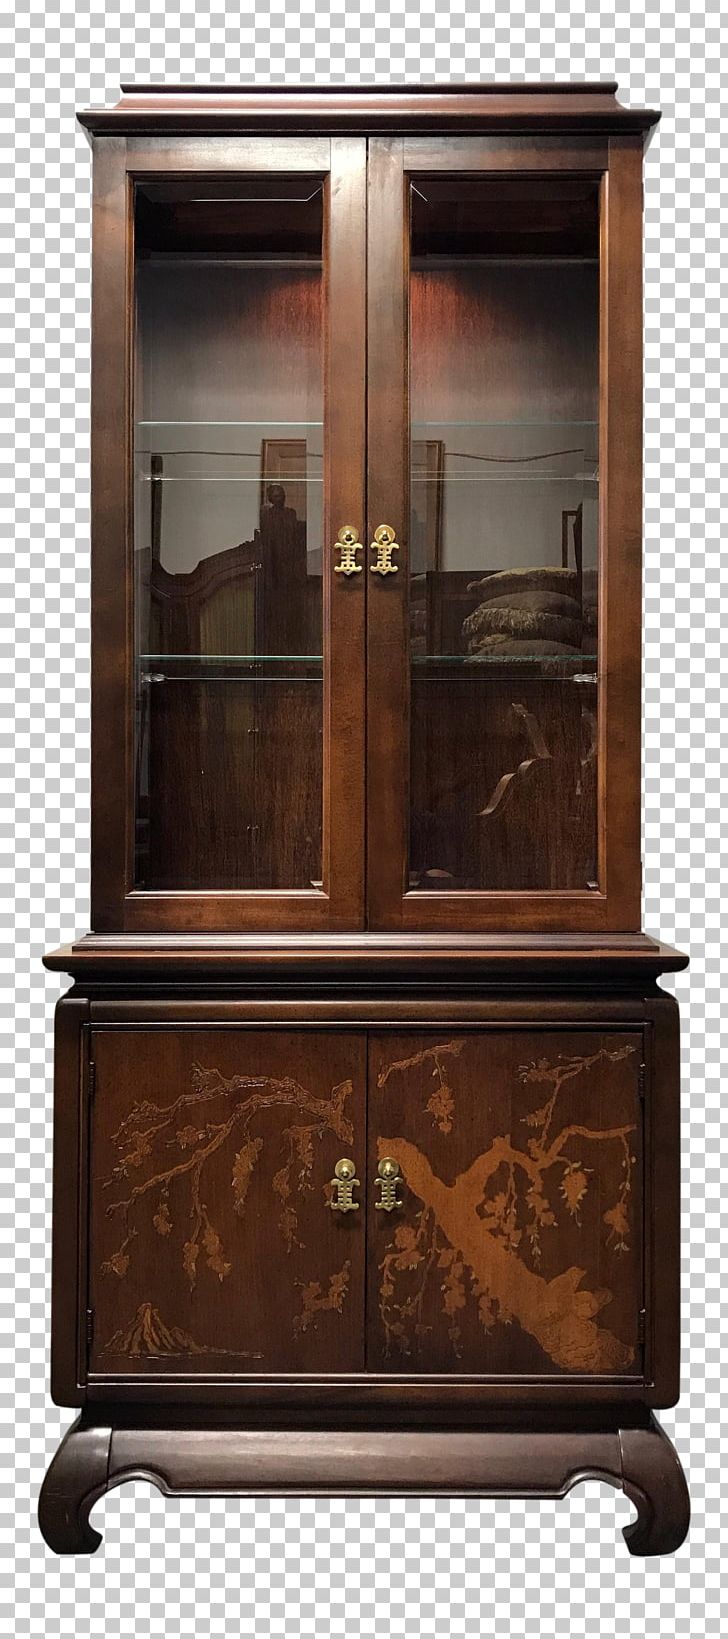 Curio Cabinet Cabinetry Cupboard Chinoiserie Shelf PNG, Clipart, Antique, Asian, Asian Furniture, Cabinet, Cabinetry Free PNG Download